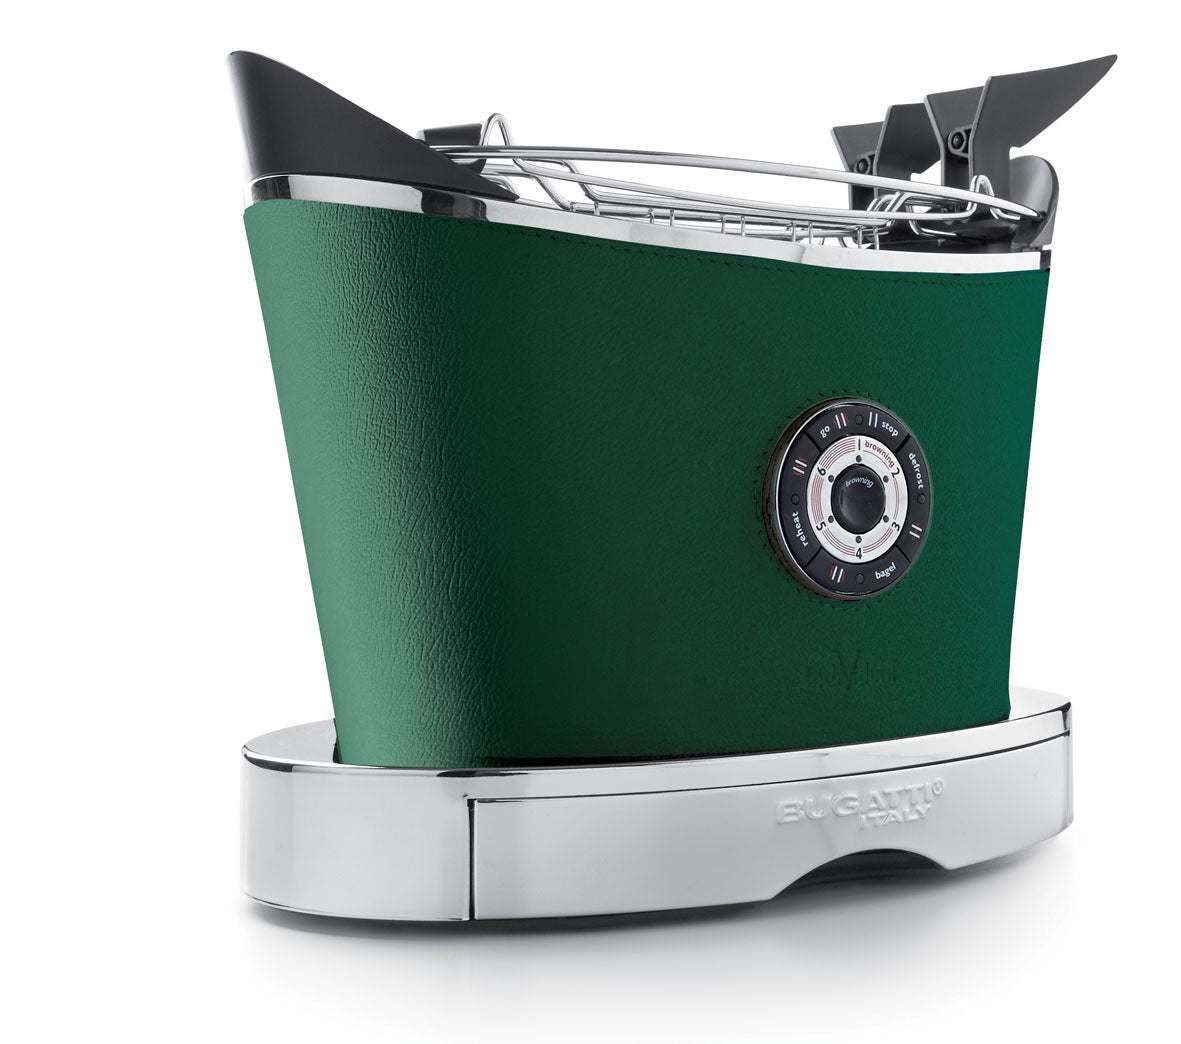 BUGATTI Volo Electric Toaster in Steel with Green Leather Upholstery